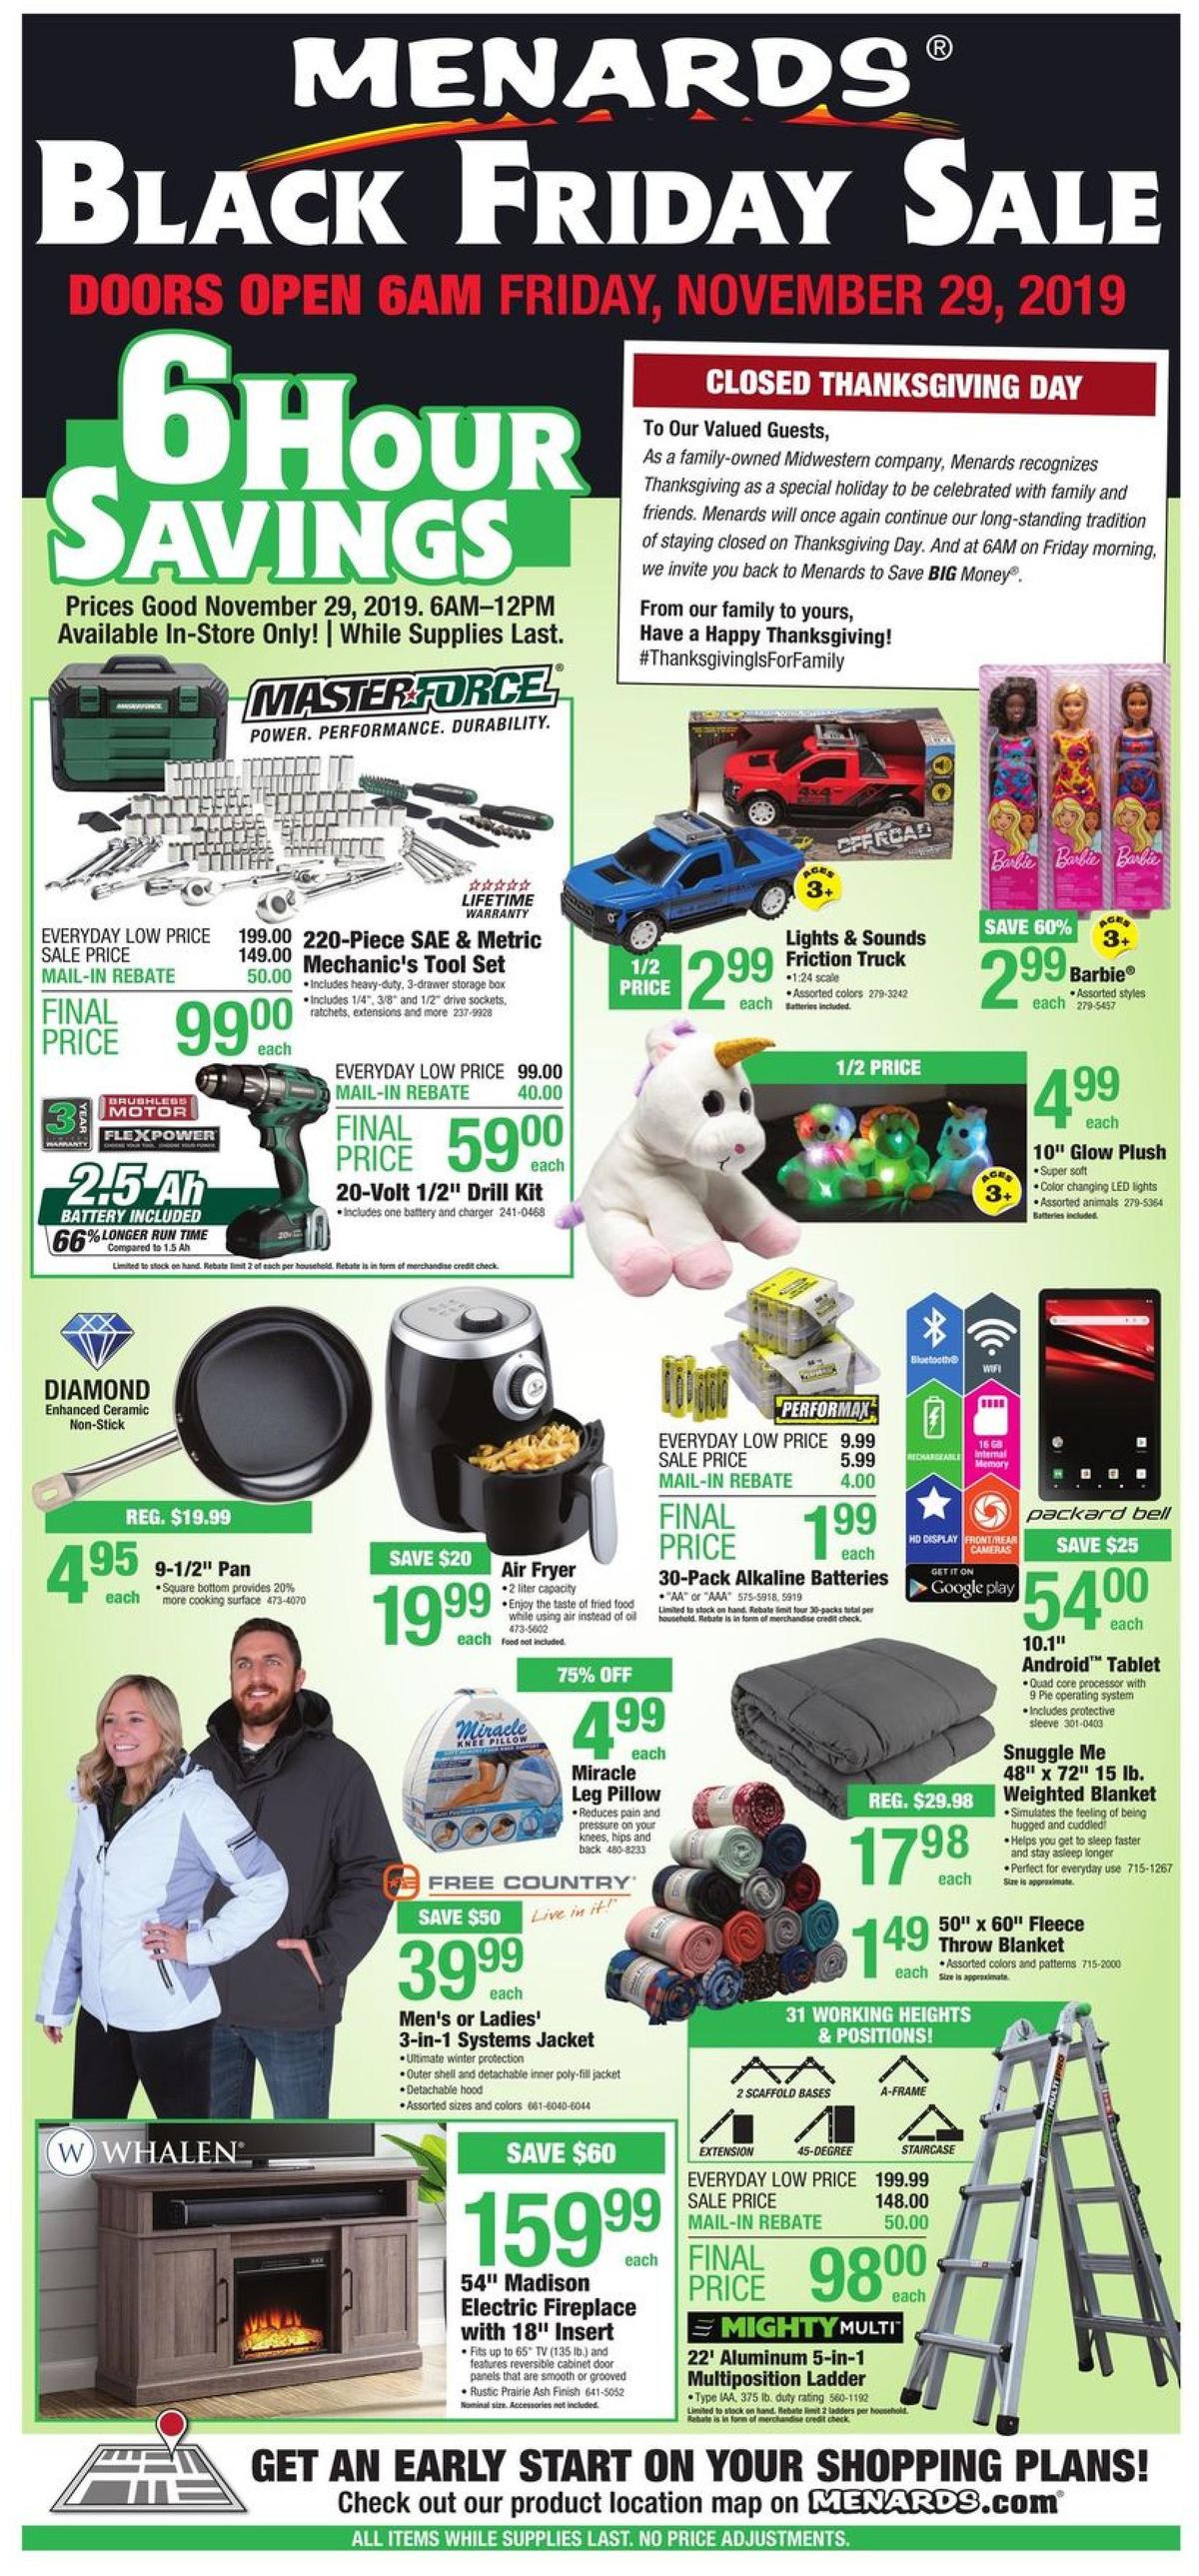 Menards Black Friday Sale Weekly Ads & Special Buys for November 29